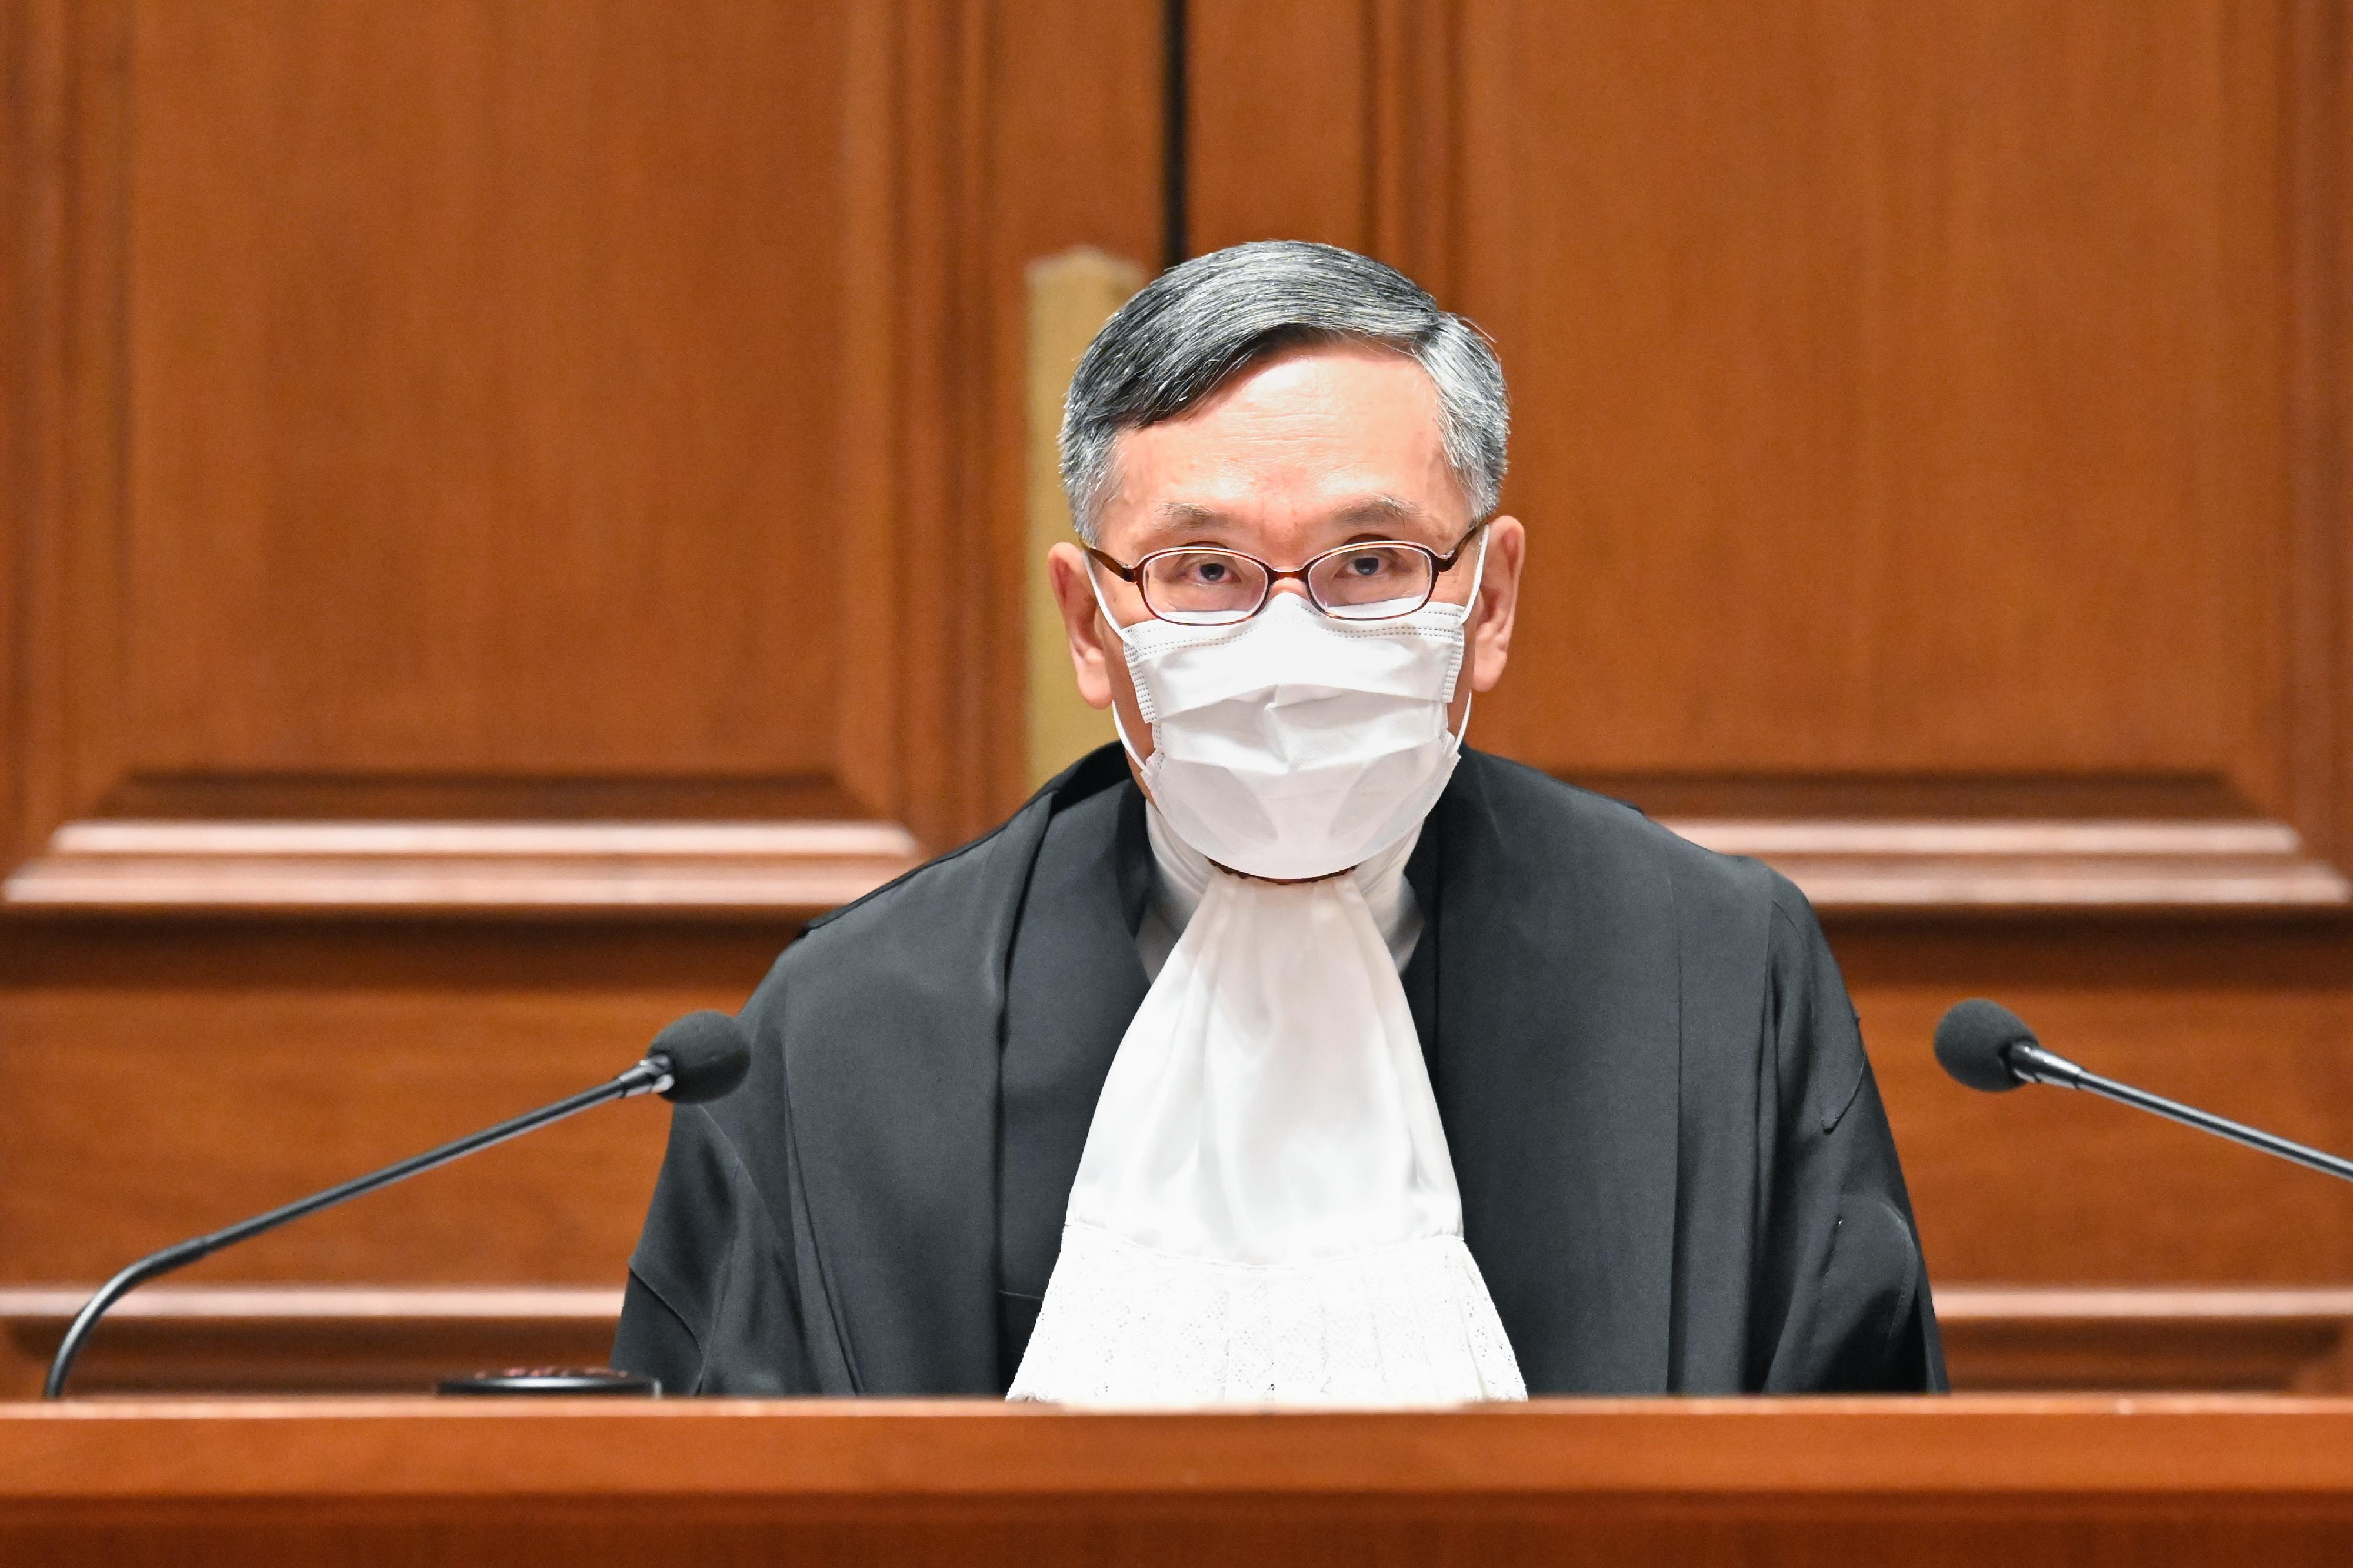 The Chief Justice of the Court of Final Appeal, Mr Andrew Cheung Kui-nung, today (January 24) gives an address at the Ceremonial Opening of the Legal Year 2022.